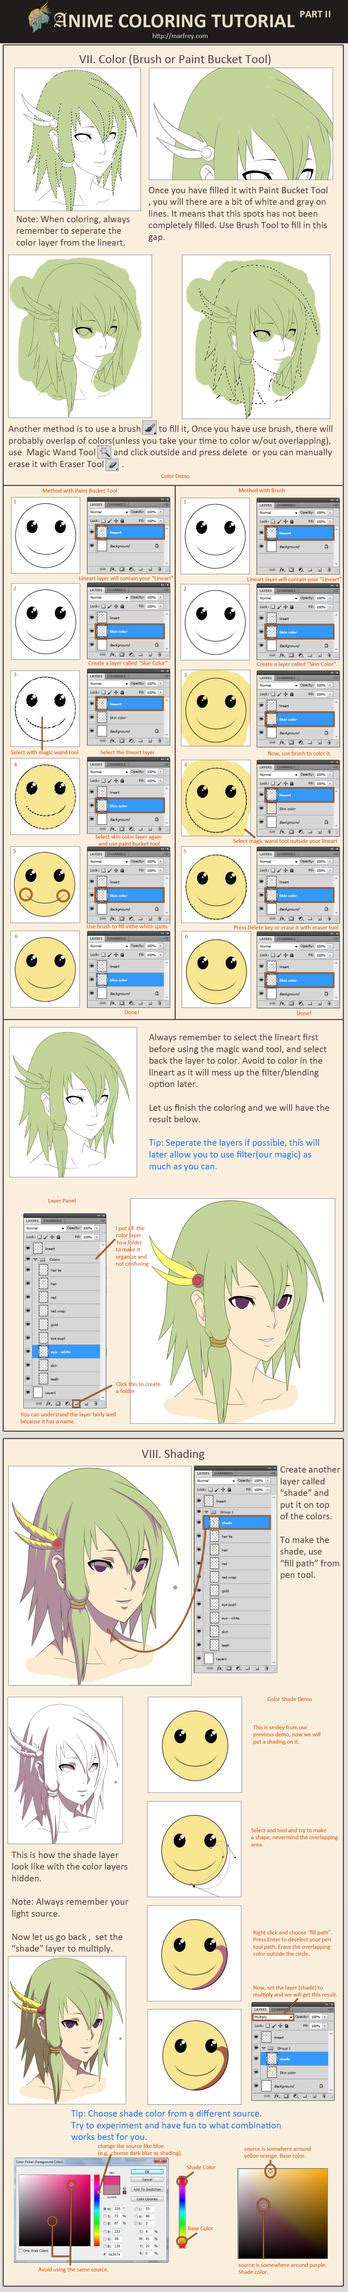 Anime Coloring Tutorial Part 2 By Marfrey On Deviantart